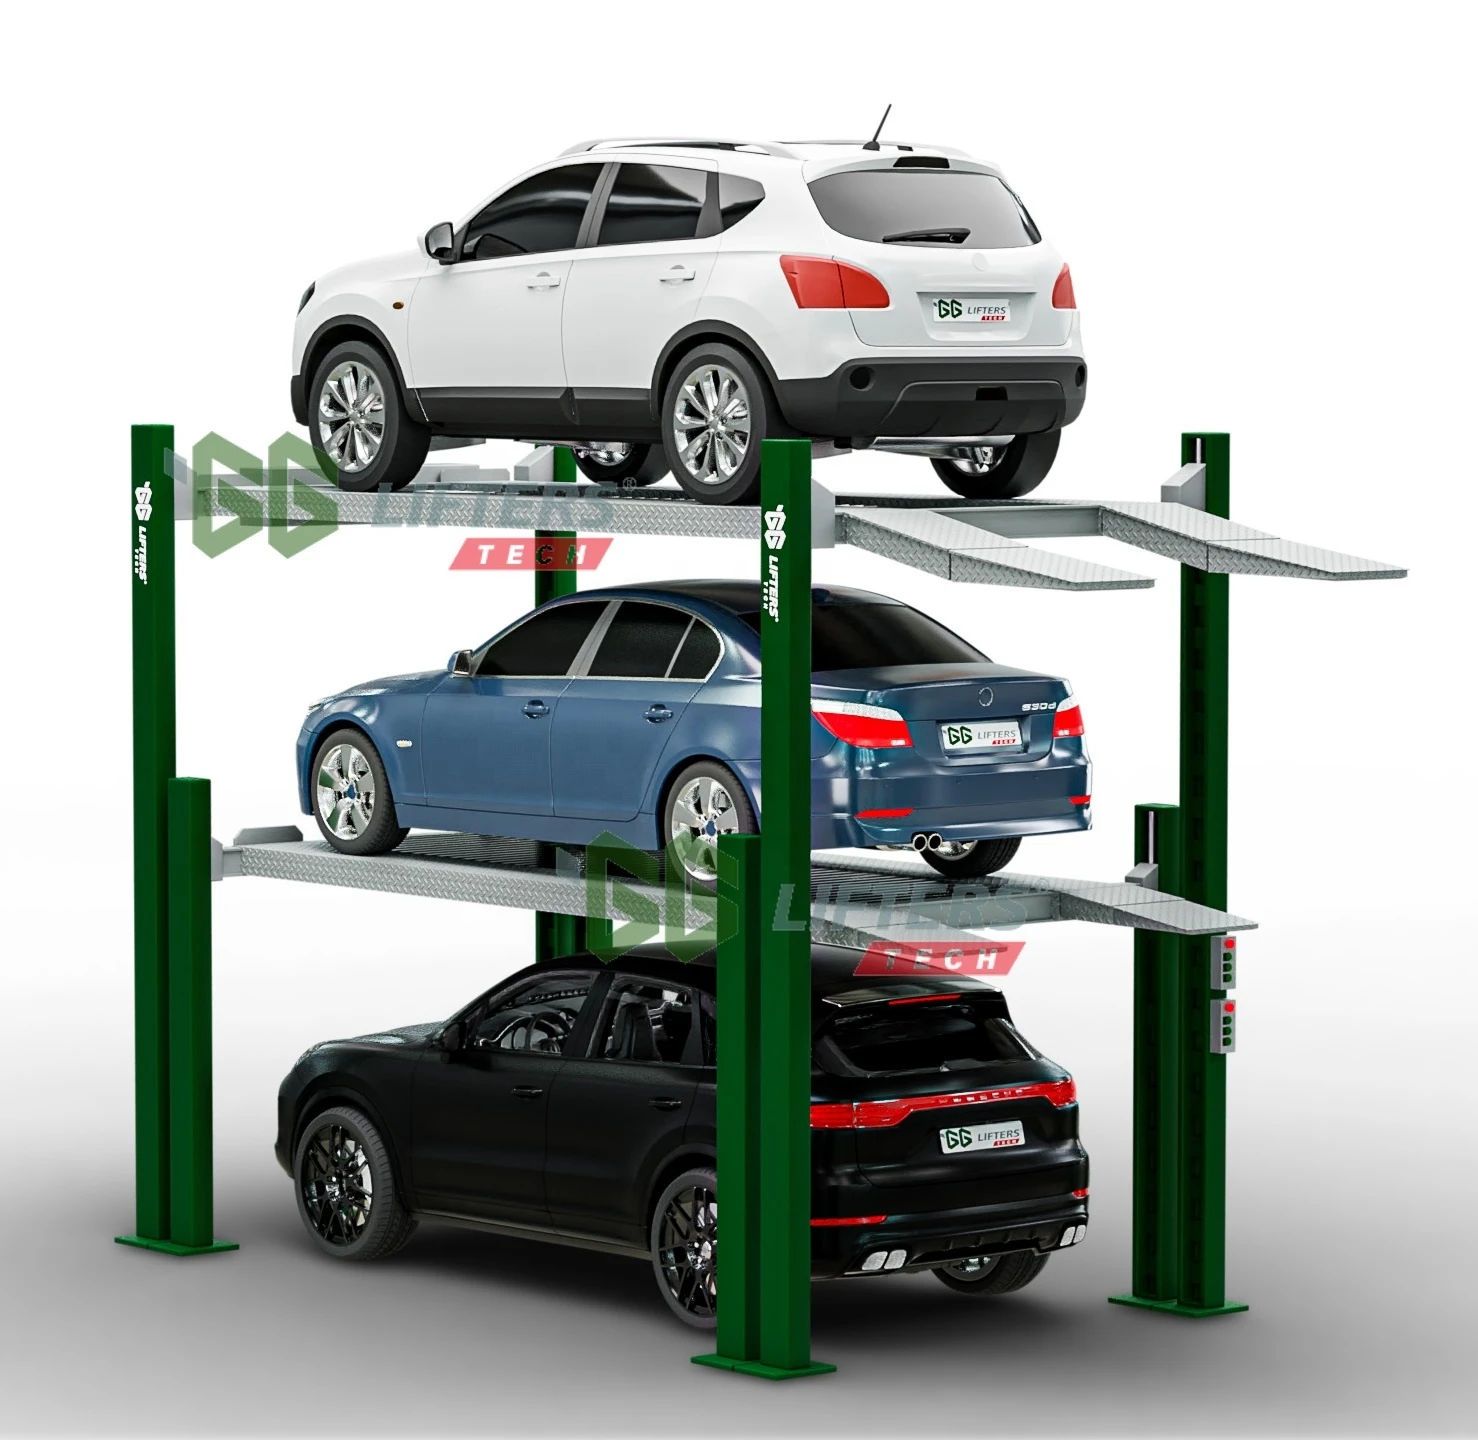 Triple Stacker Parking Solutions Vehicle Lifting System Garage Equipment